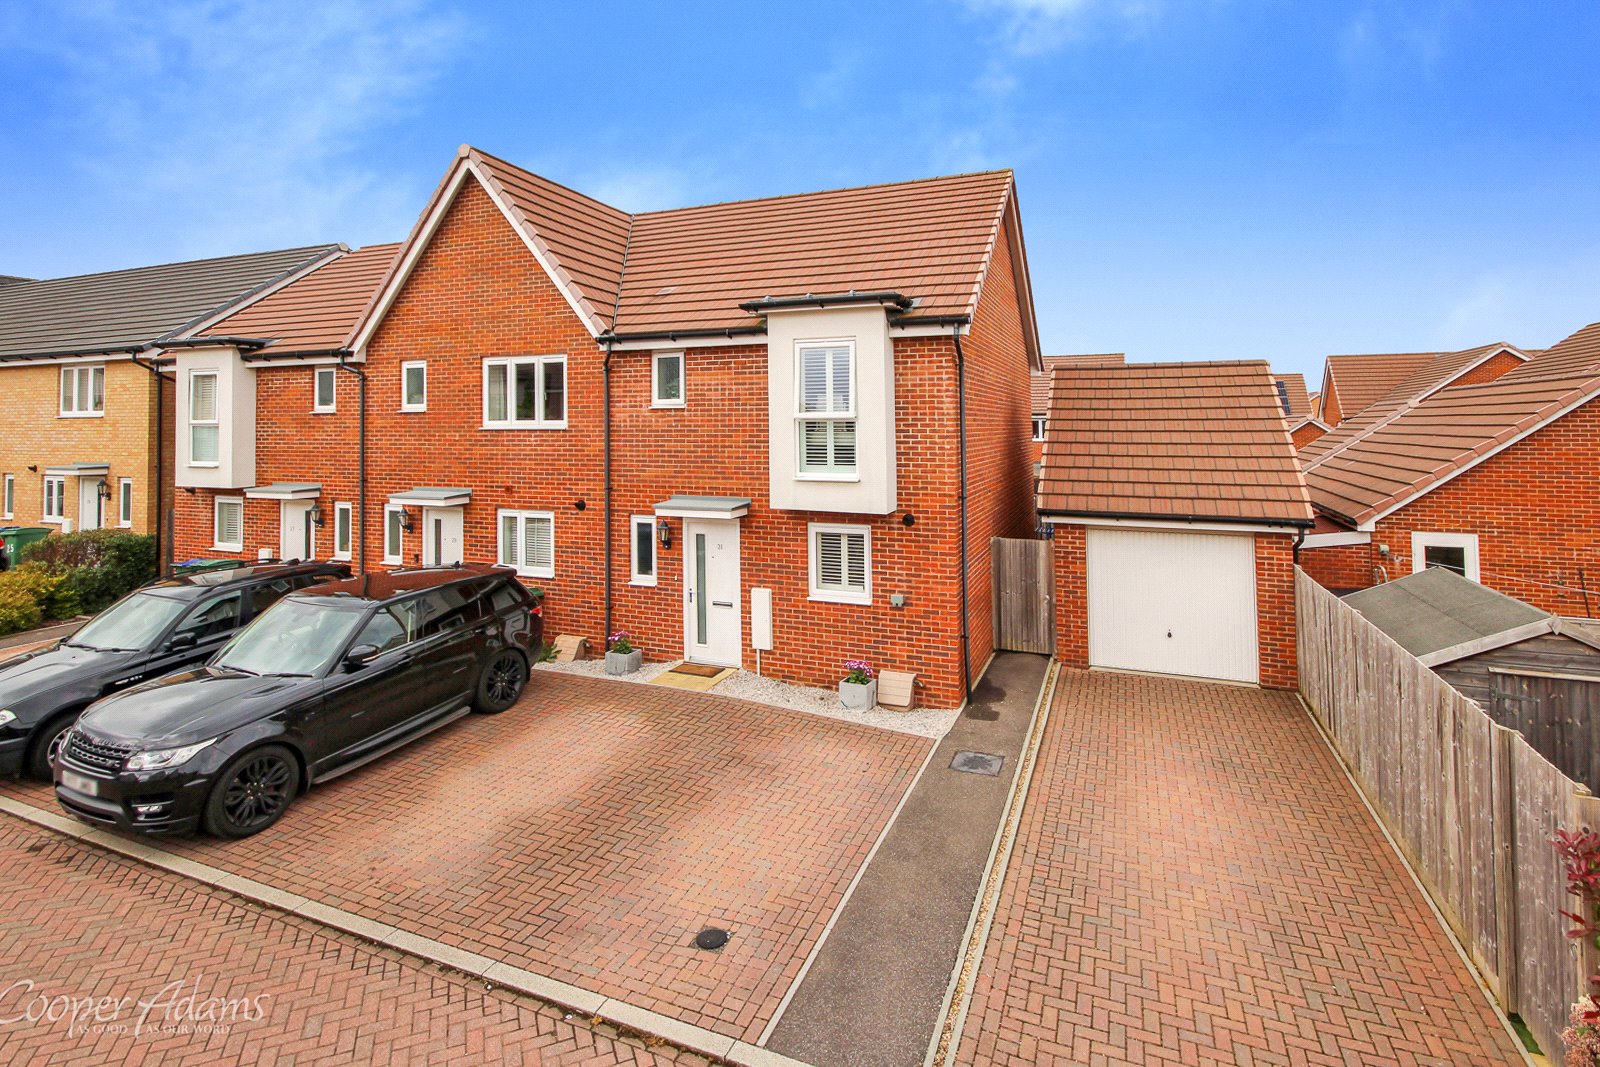 3 bed house for sale in Jackson Way, Littlehampton  - Property Image 1